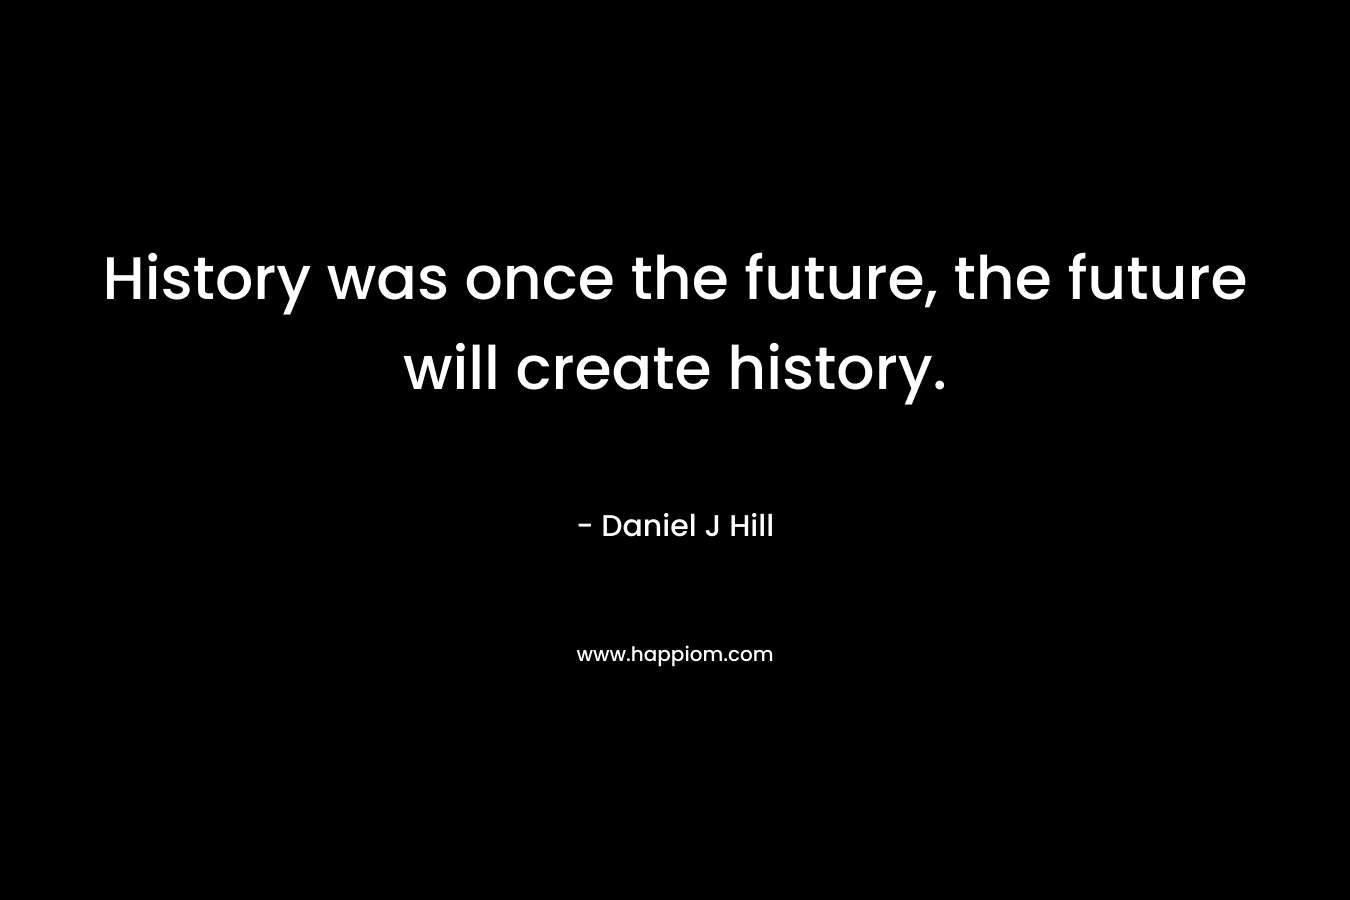 History was once the future, the future will create history.